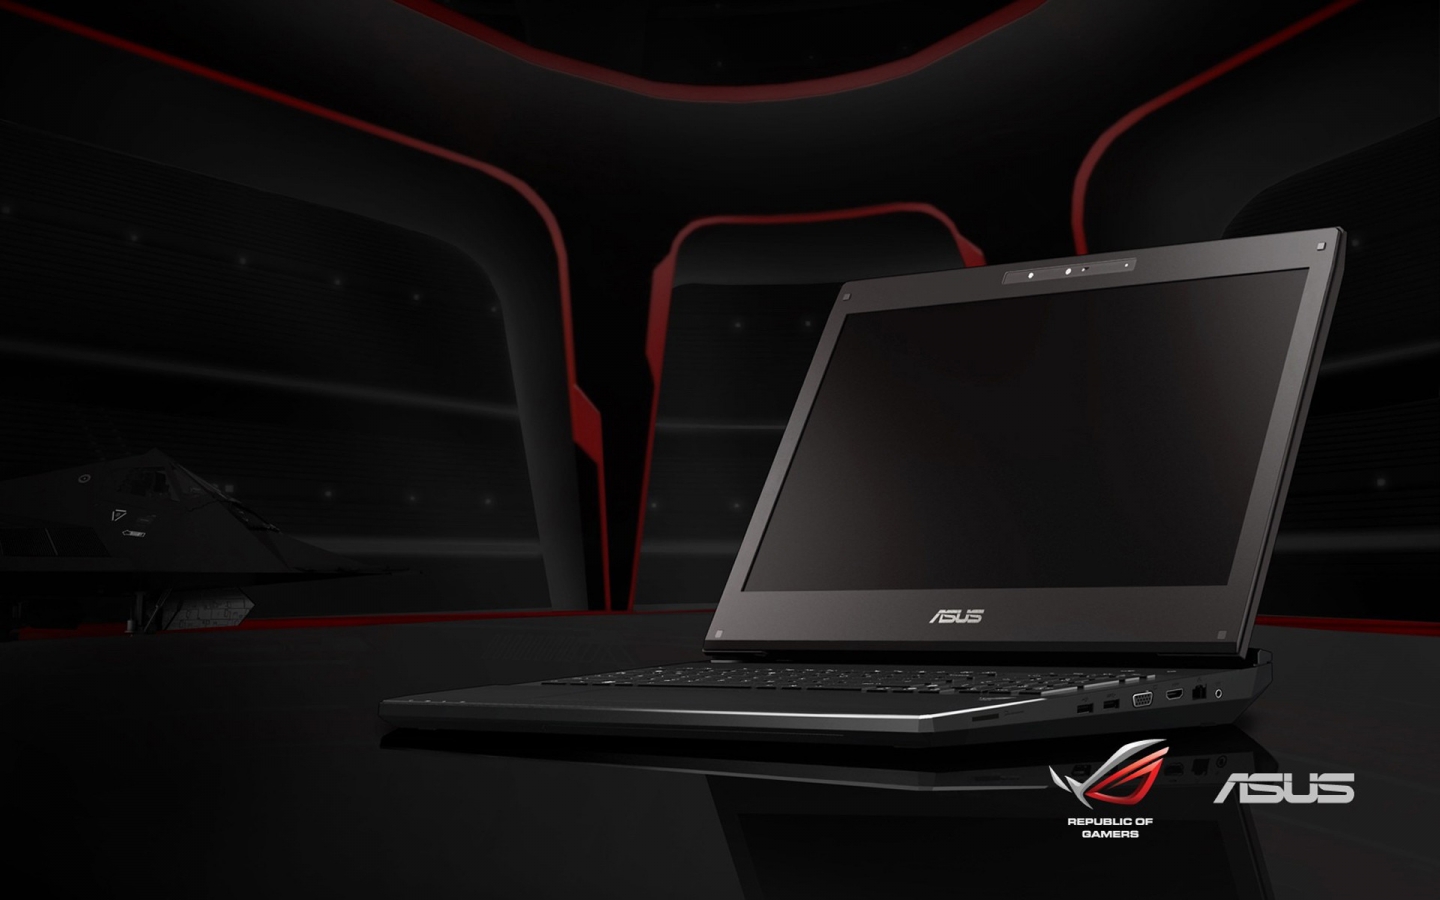 Asus Notebook for 1440 x 900 widescreen resolution